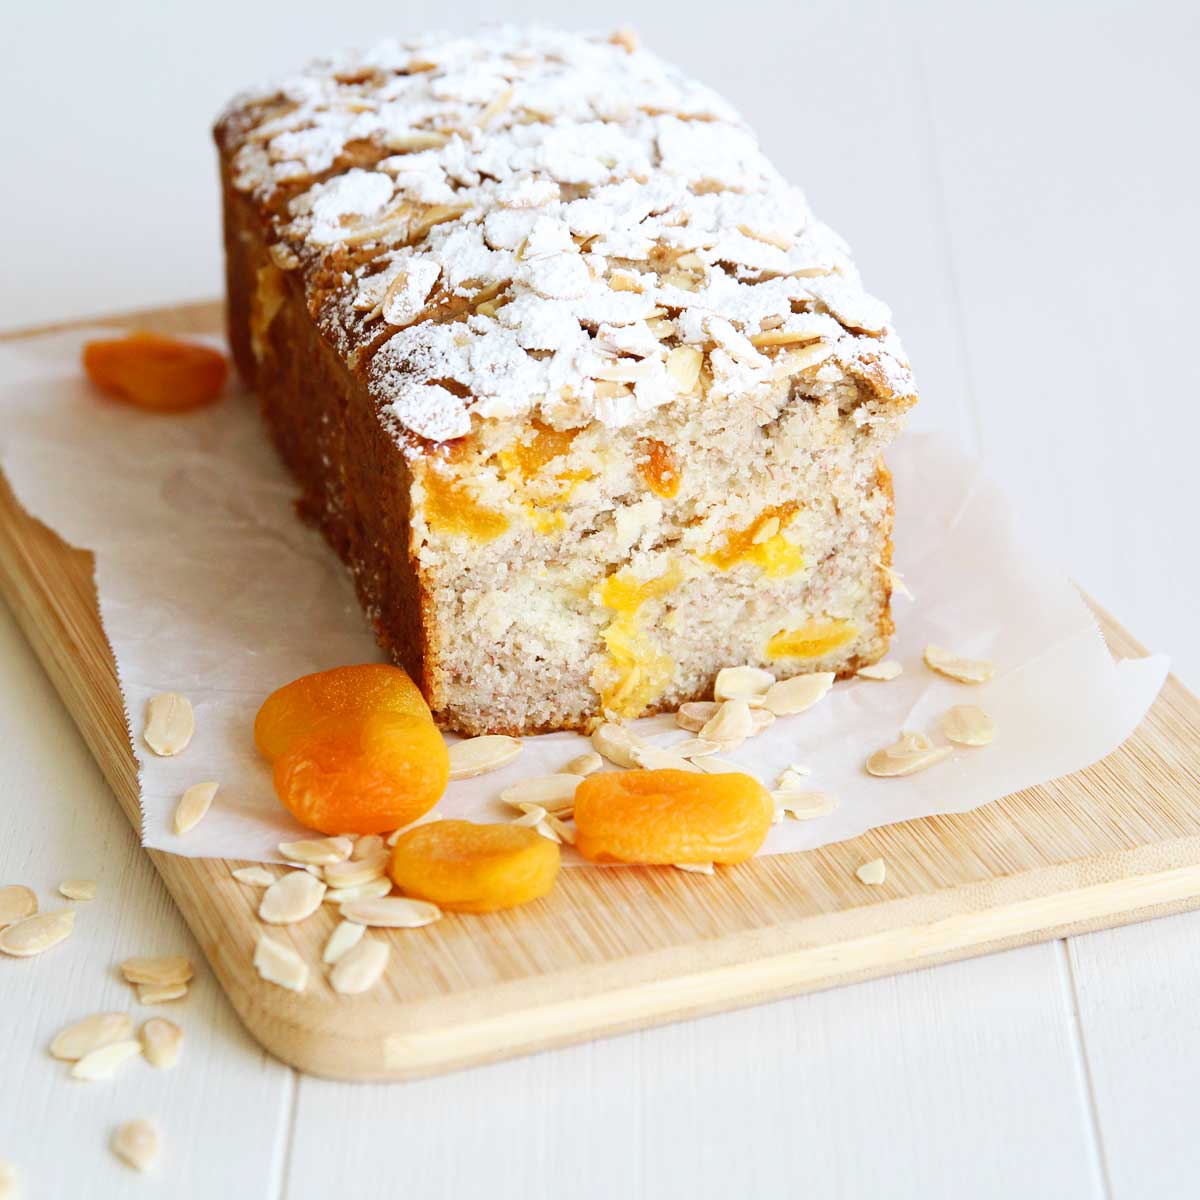 Simply Divine: Moist Vegan Almond Banana Bread with Apricots (Eggless, Dairy Free!) - Red Bean Mochi Cake